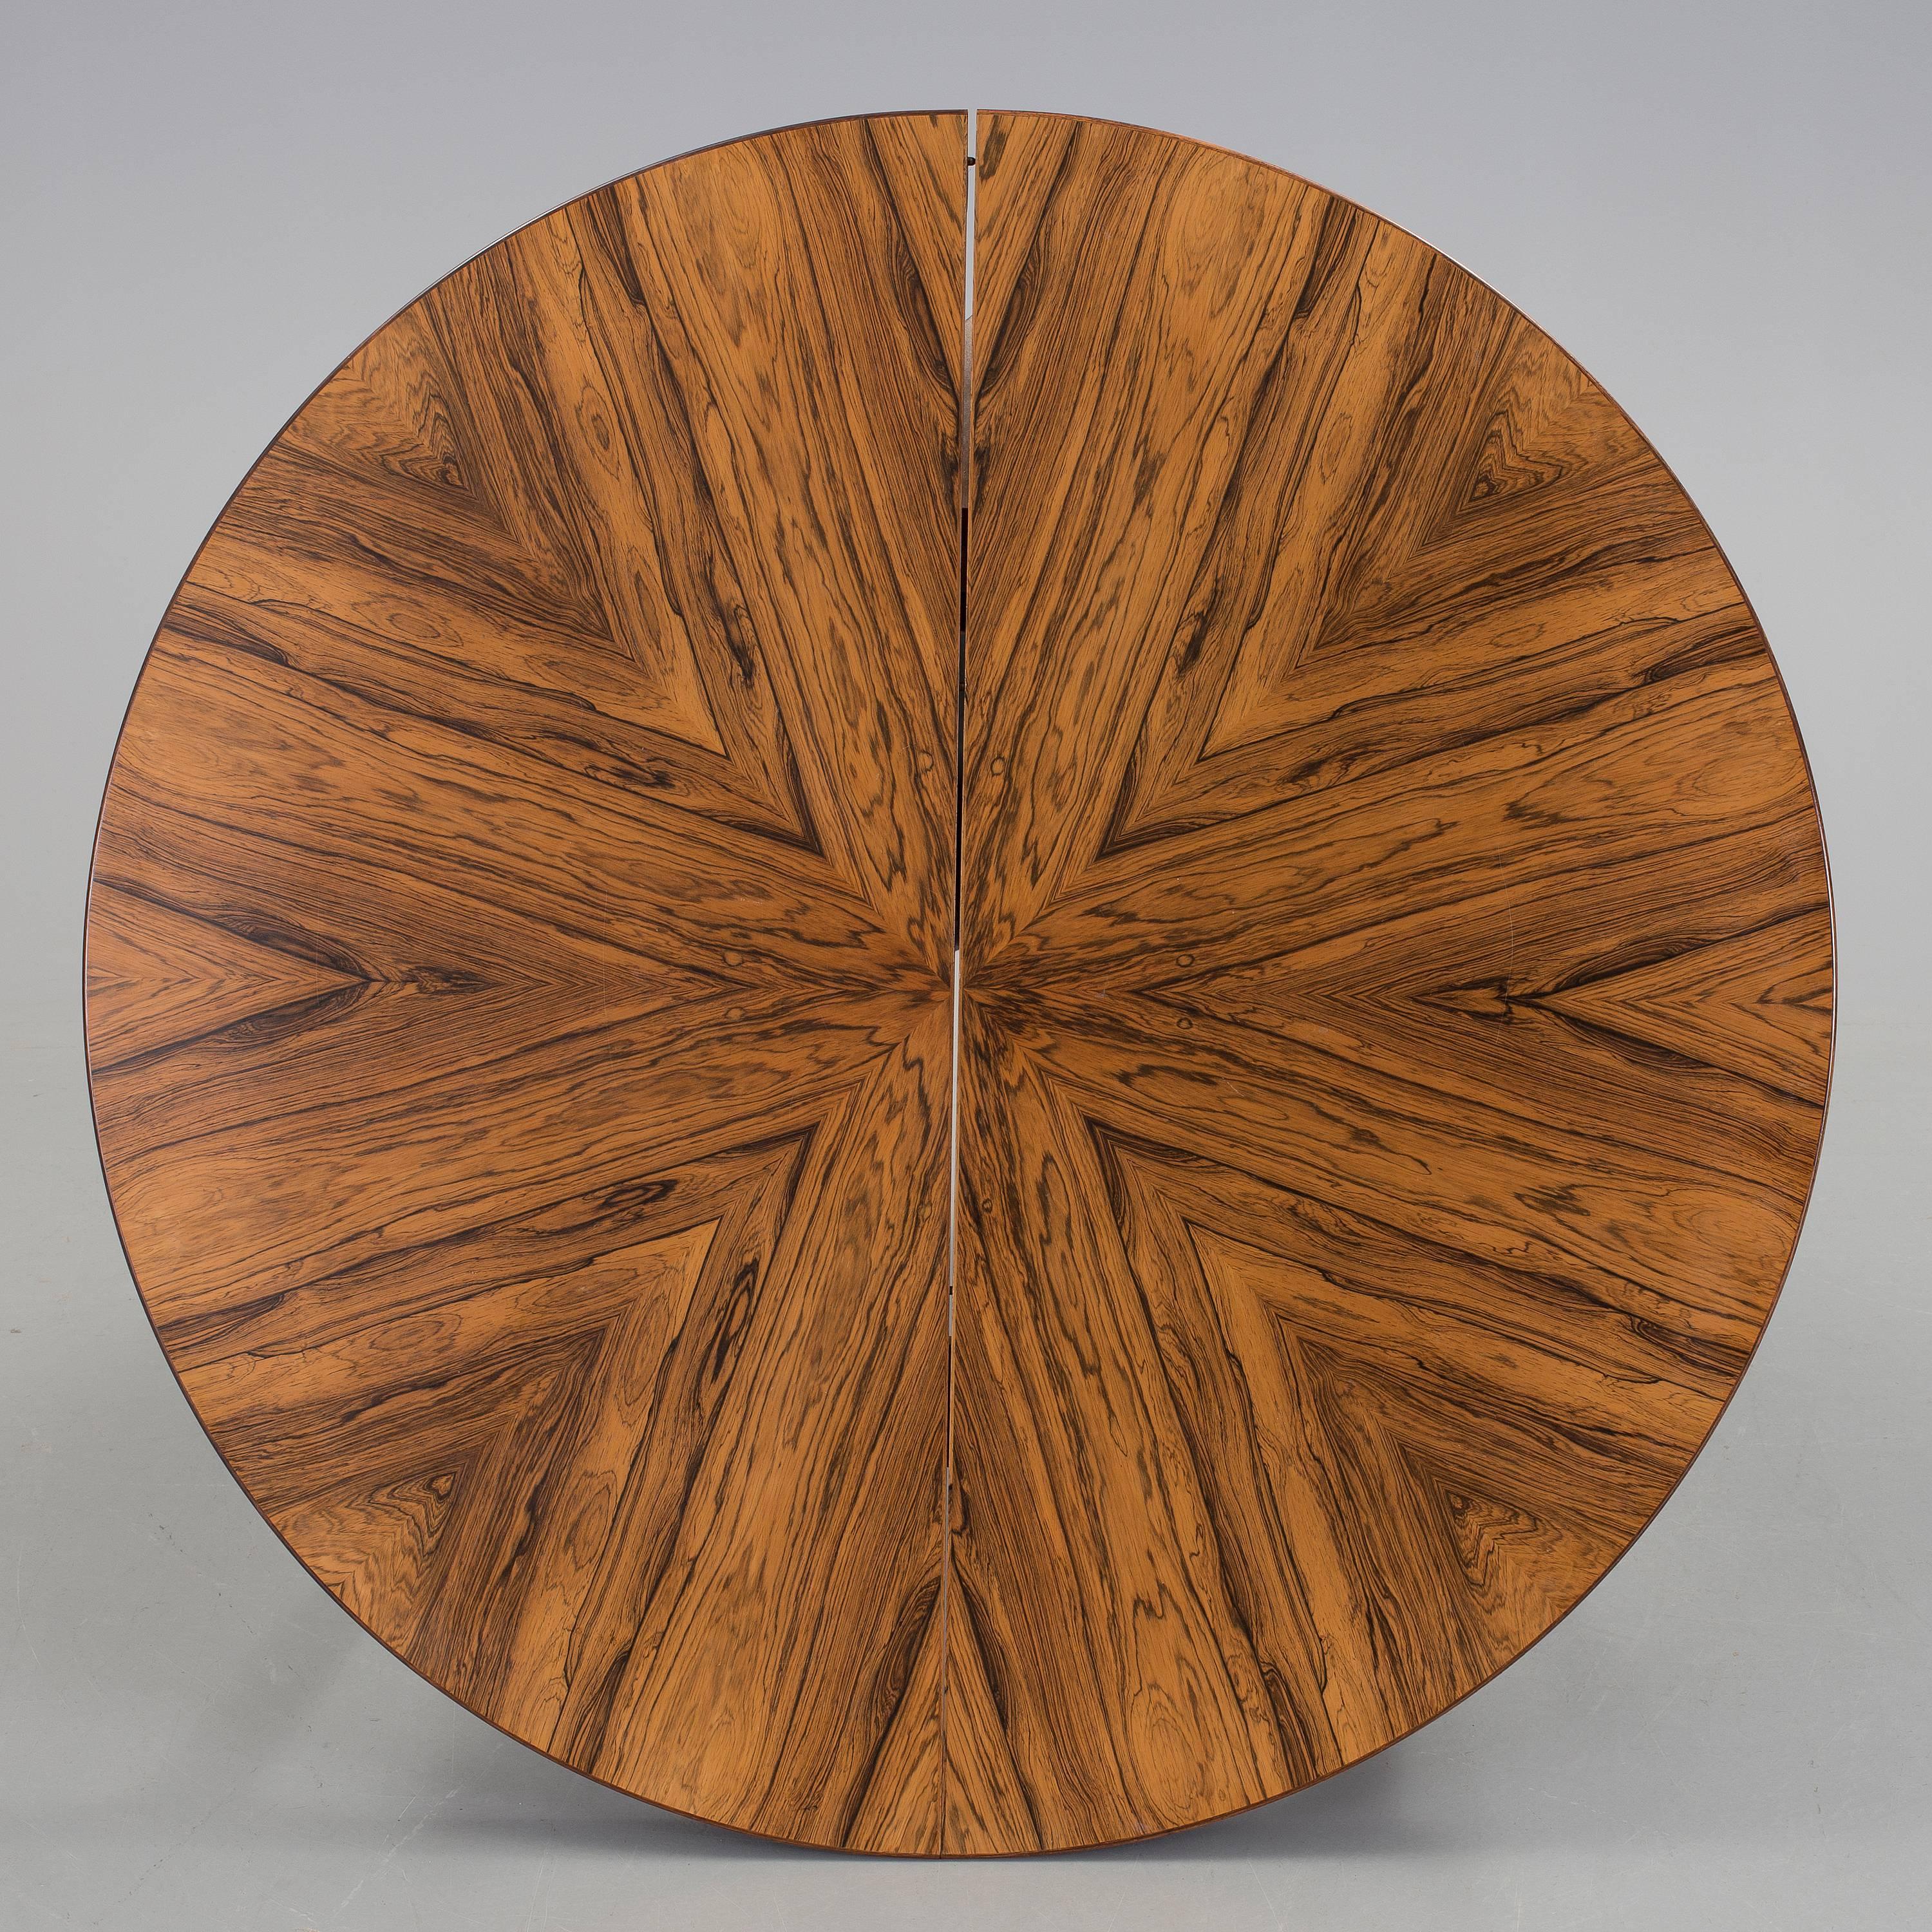 A excellent Cortina table in rosewood by Svante Skogh,
manufactured by Säffle Möbelfabrik, Sweden, 1960s
120 cm diameter, extended length with two leafs 200 cm,.